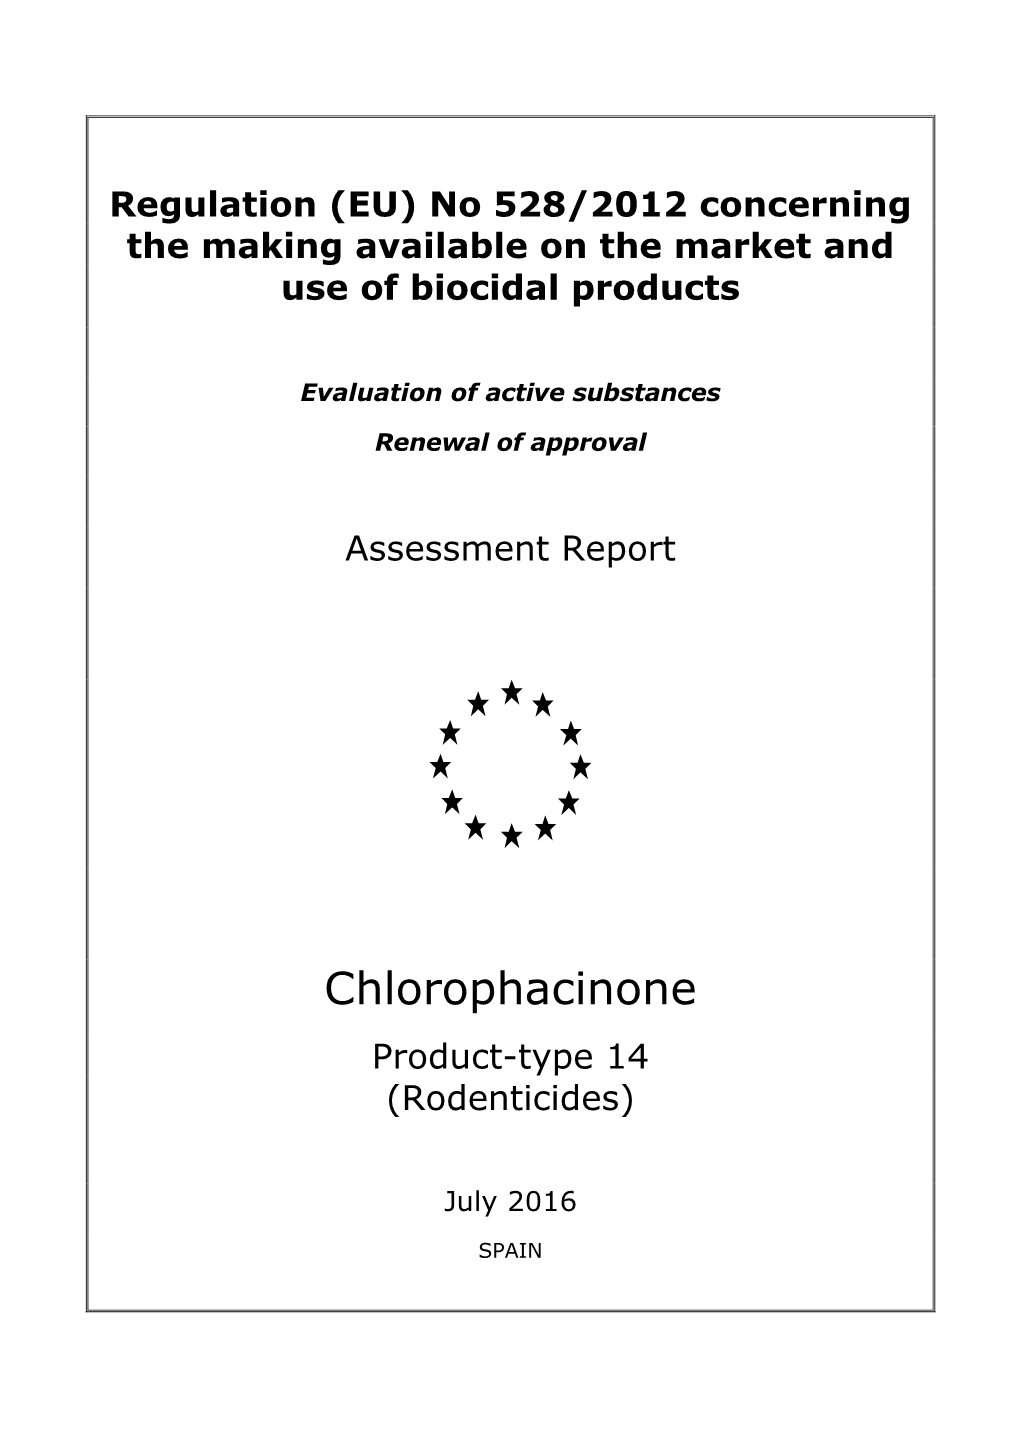 Chlorophacinone Product-Type 14 (Rodenticides)